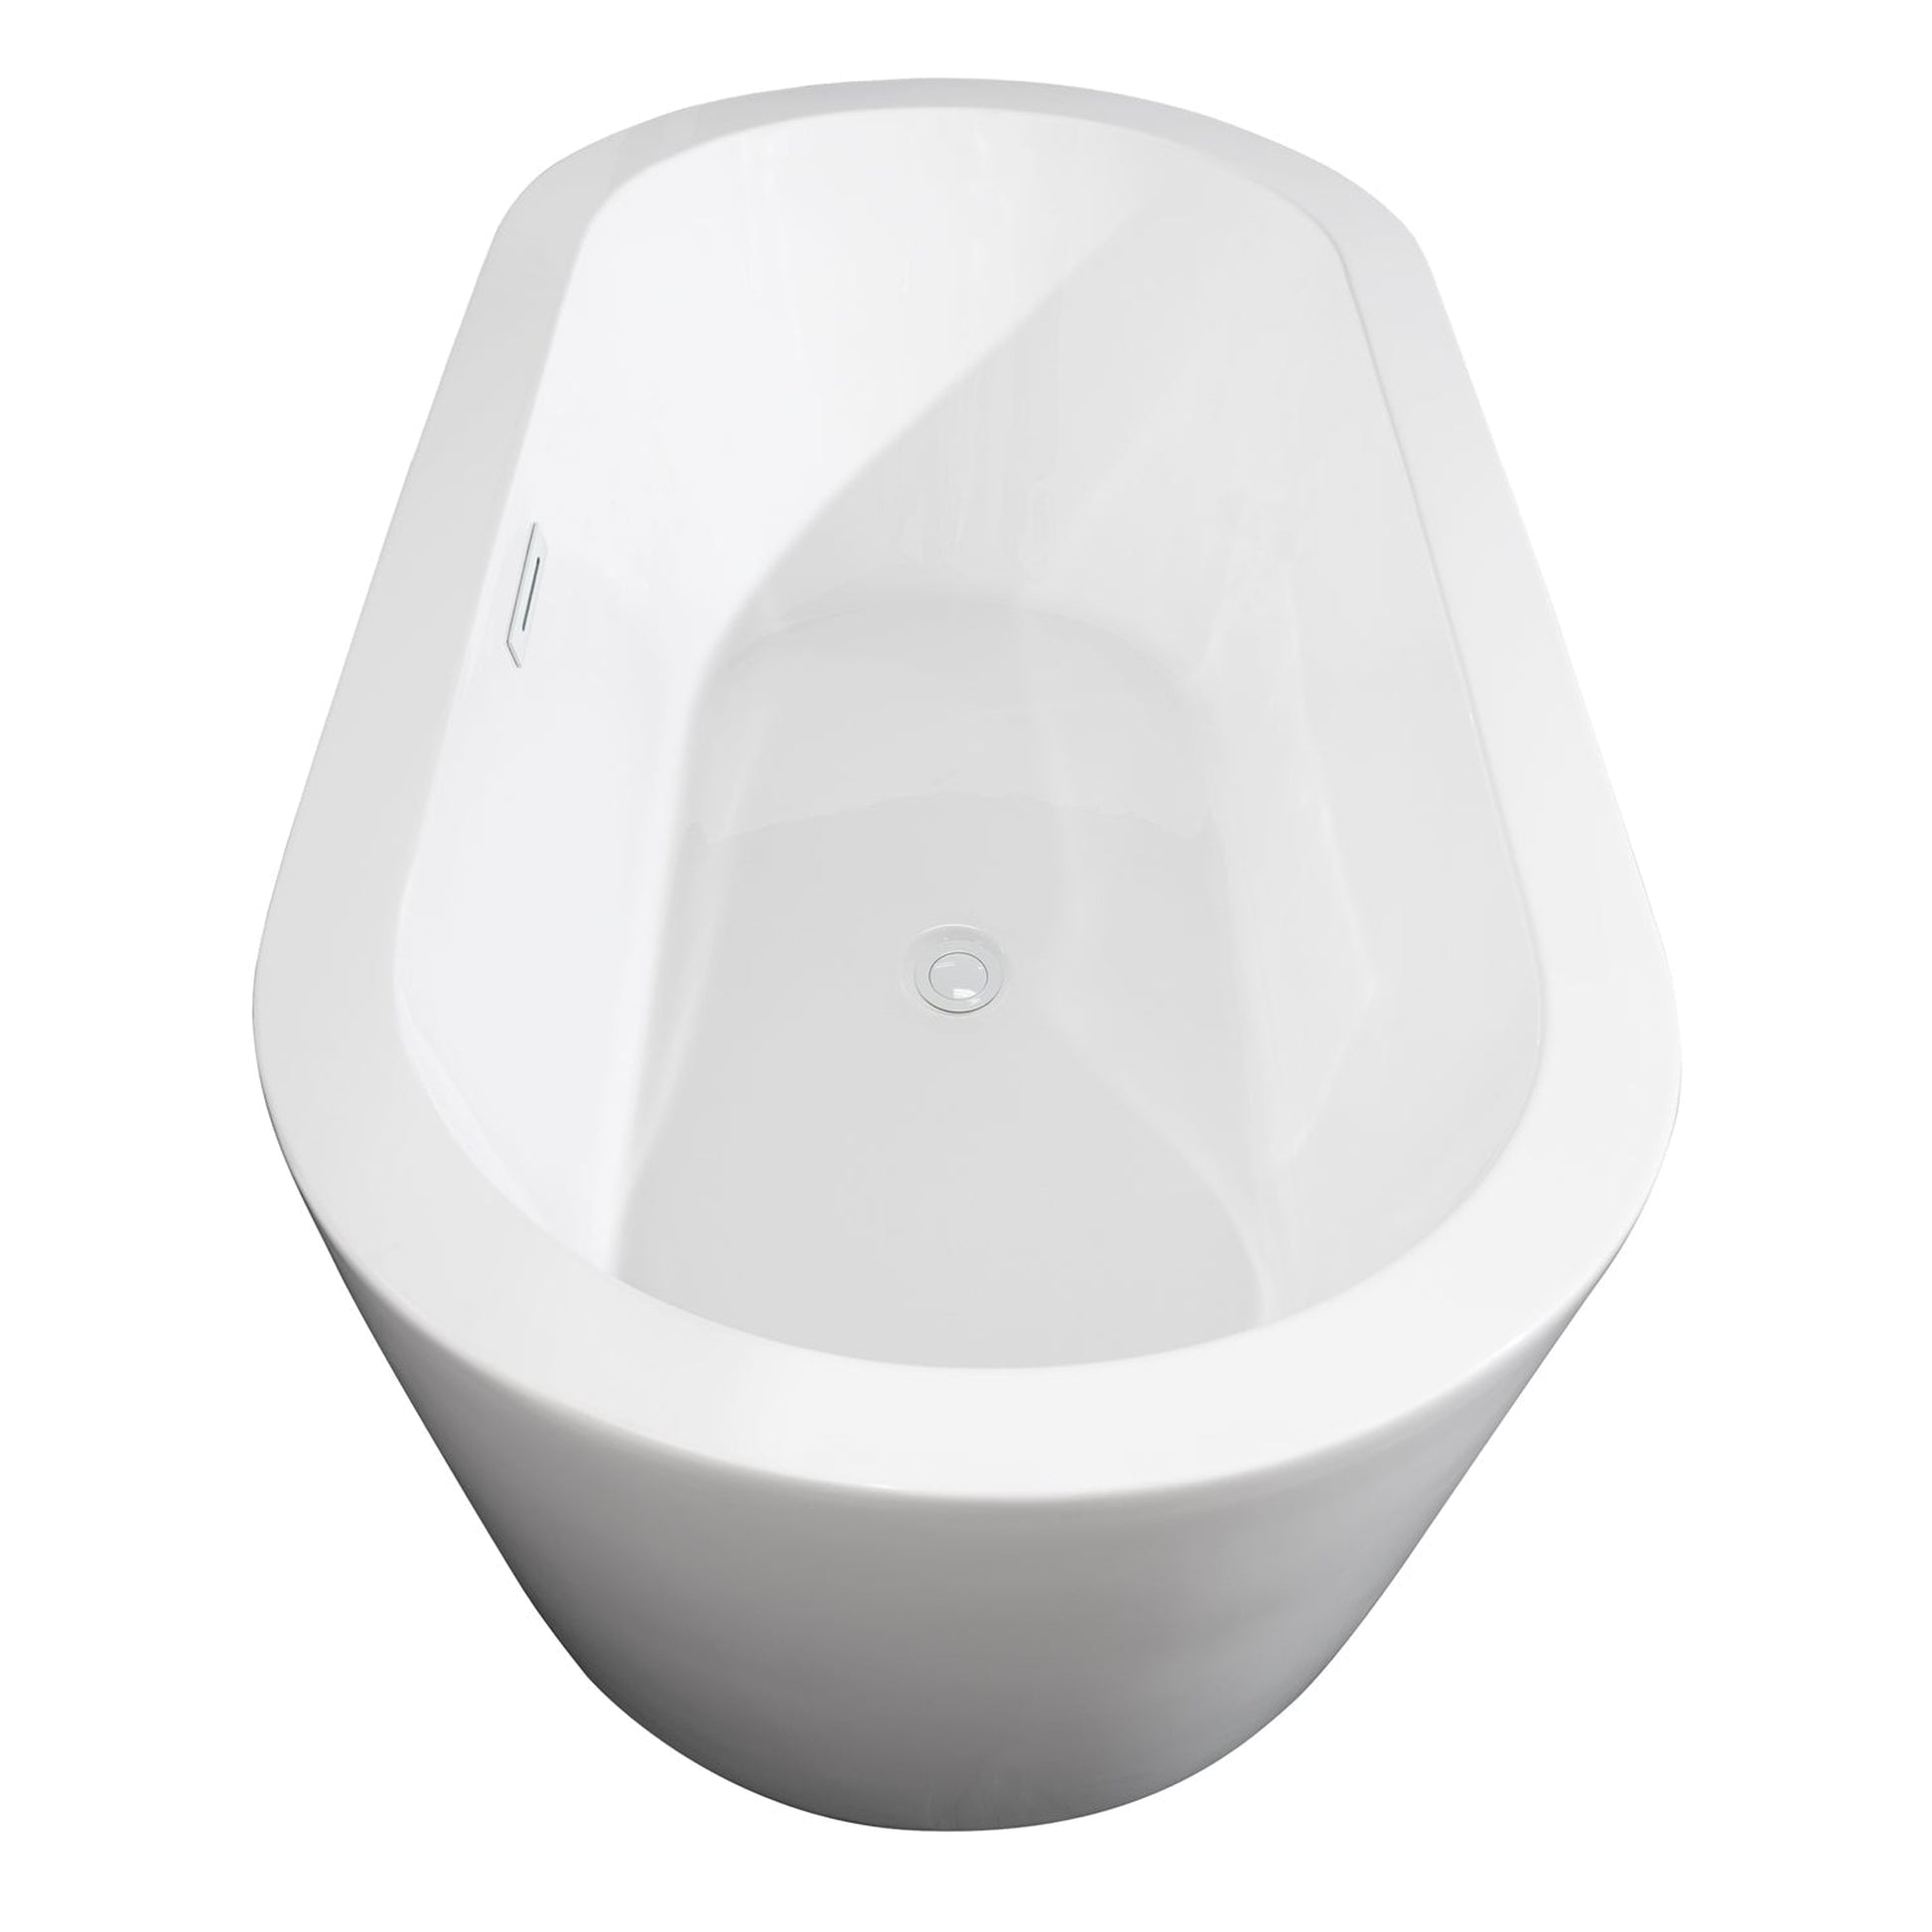 Wyndham Collection Mermaid 71" Freestanding Bathtub in White With Shiny White Drain and Overflow Trim